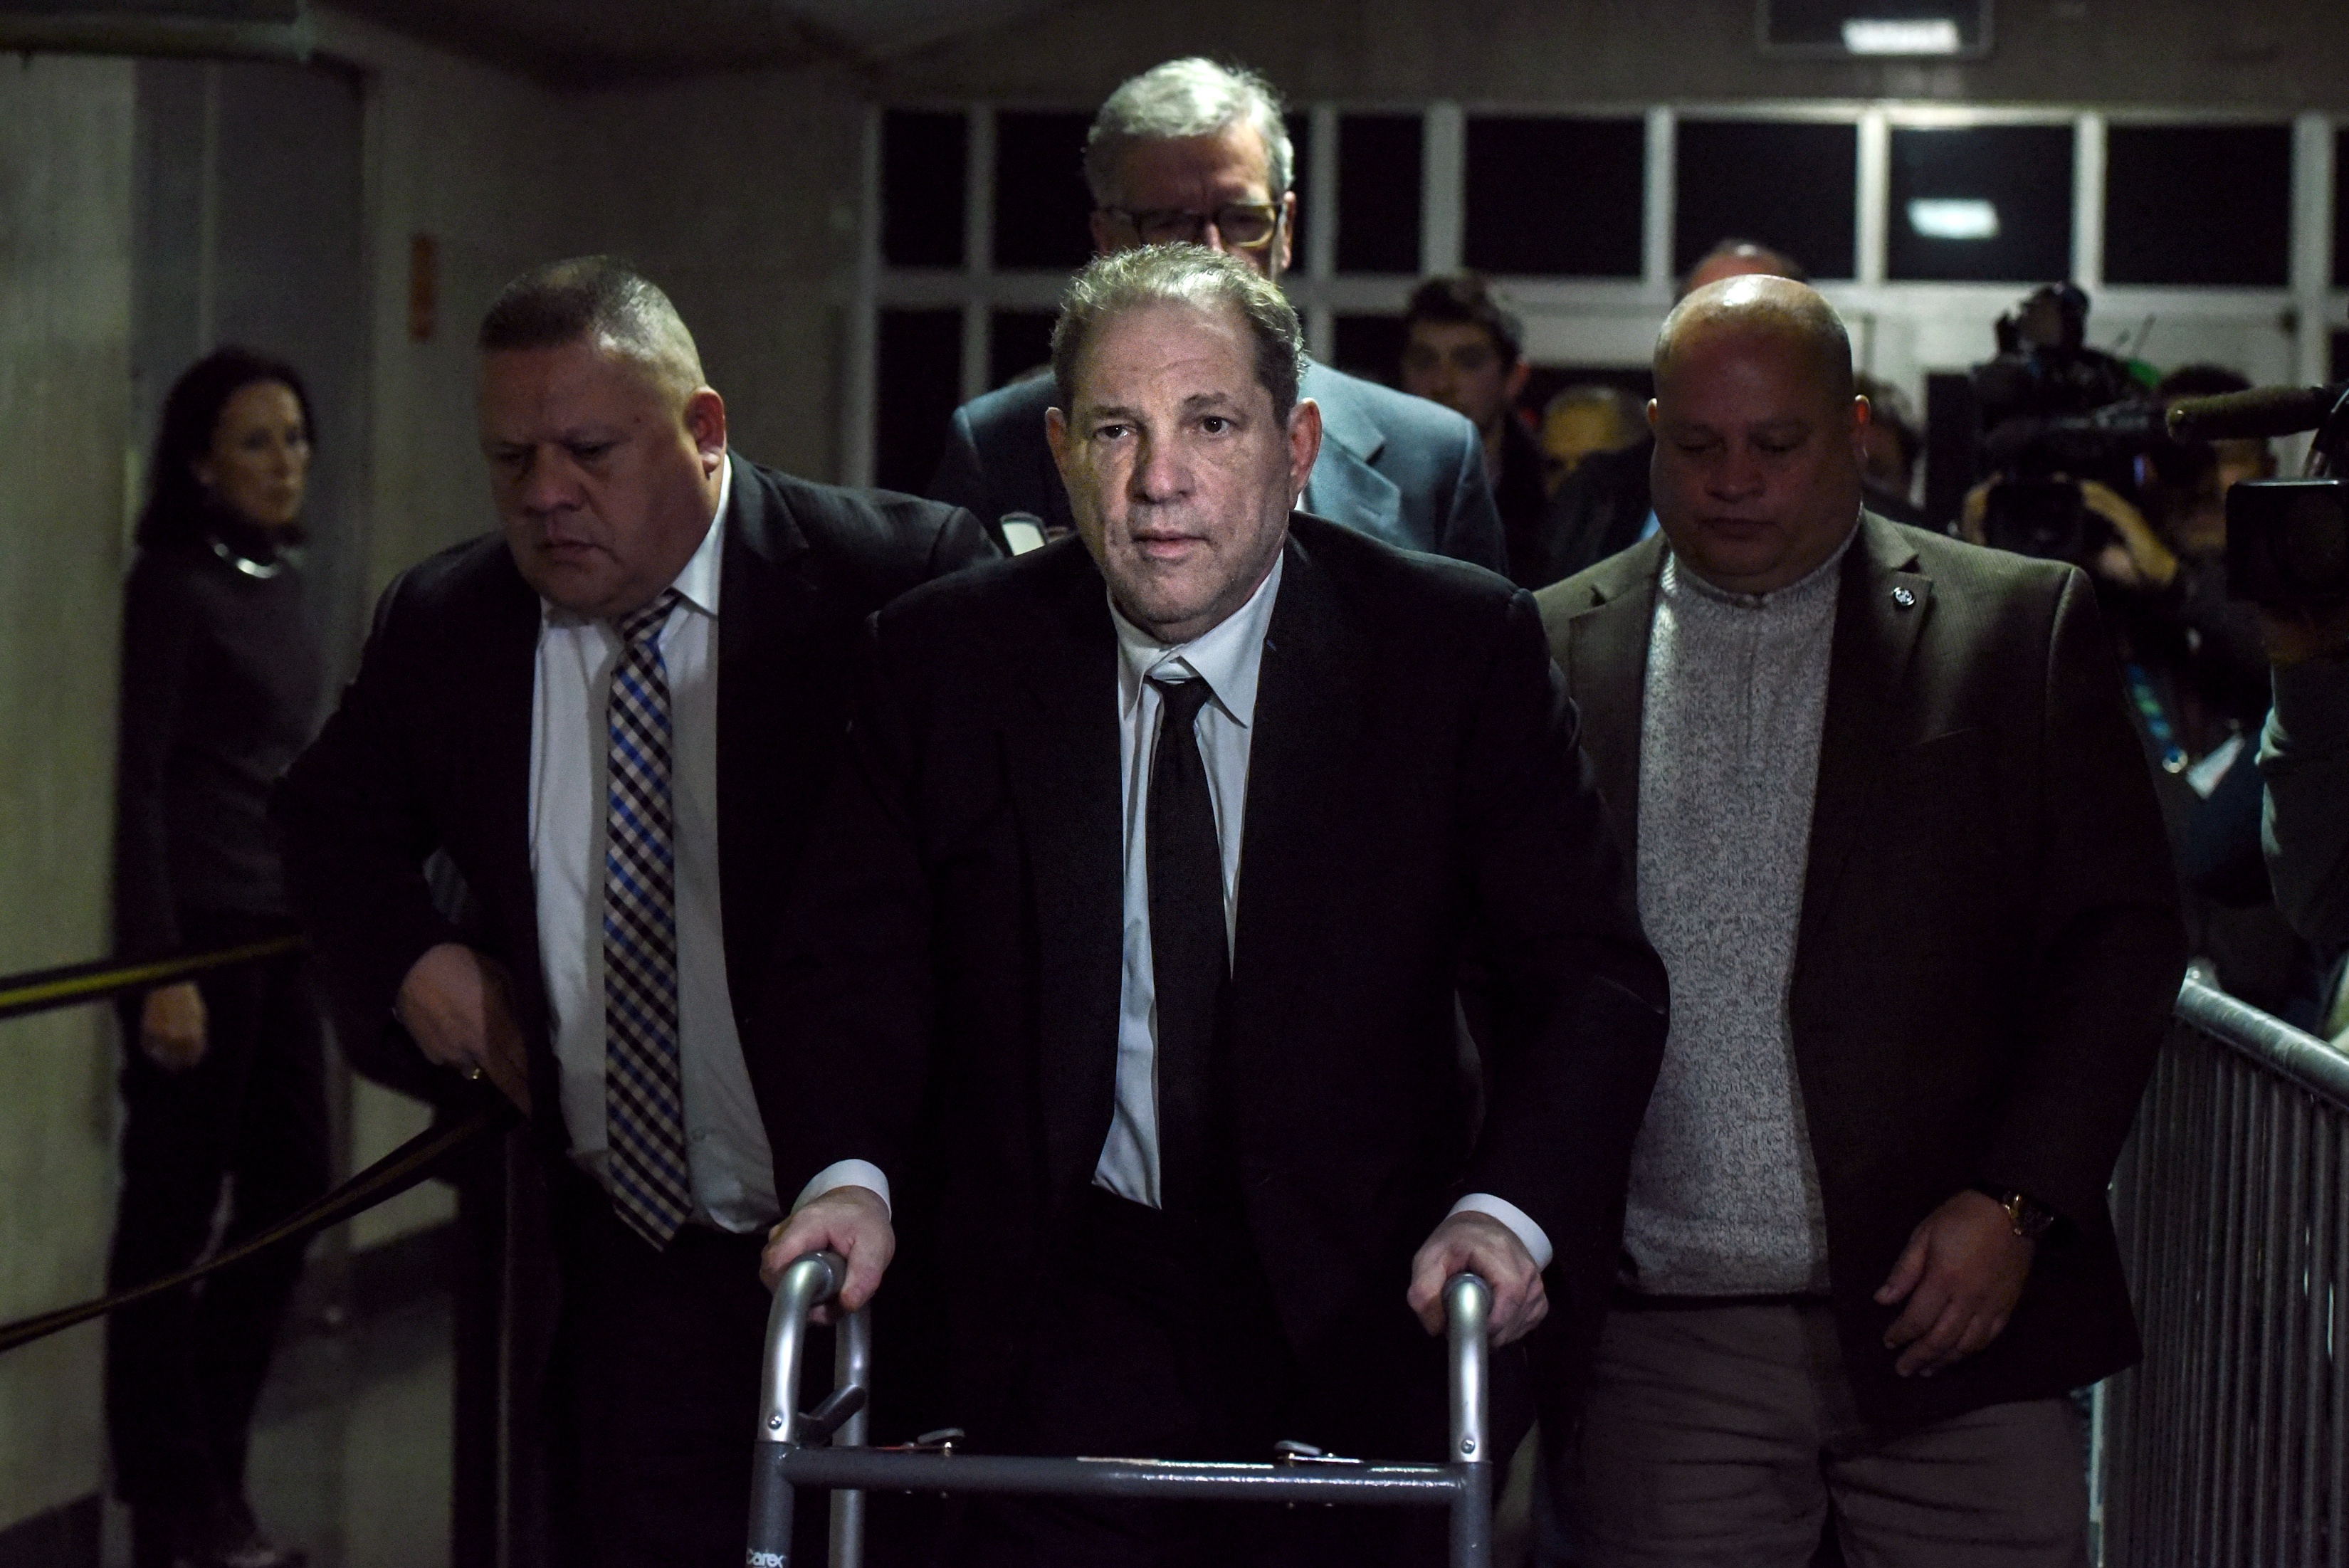 Harvey Weinstein leaves the courtroom in New York City criminal court on January 6, 2020 in New York City. Weinstein, a movie producer whose alleged sexual misconduct helped spark the #MeToo movement, pleaded not-guilty on five counts of rape and sexual assault against two unnamed women and faces a possible life sentence in prison. (Photo by Stephanie Keith/Getty Images)